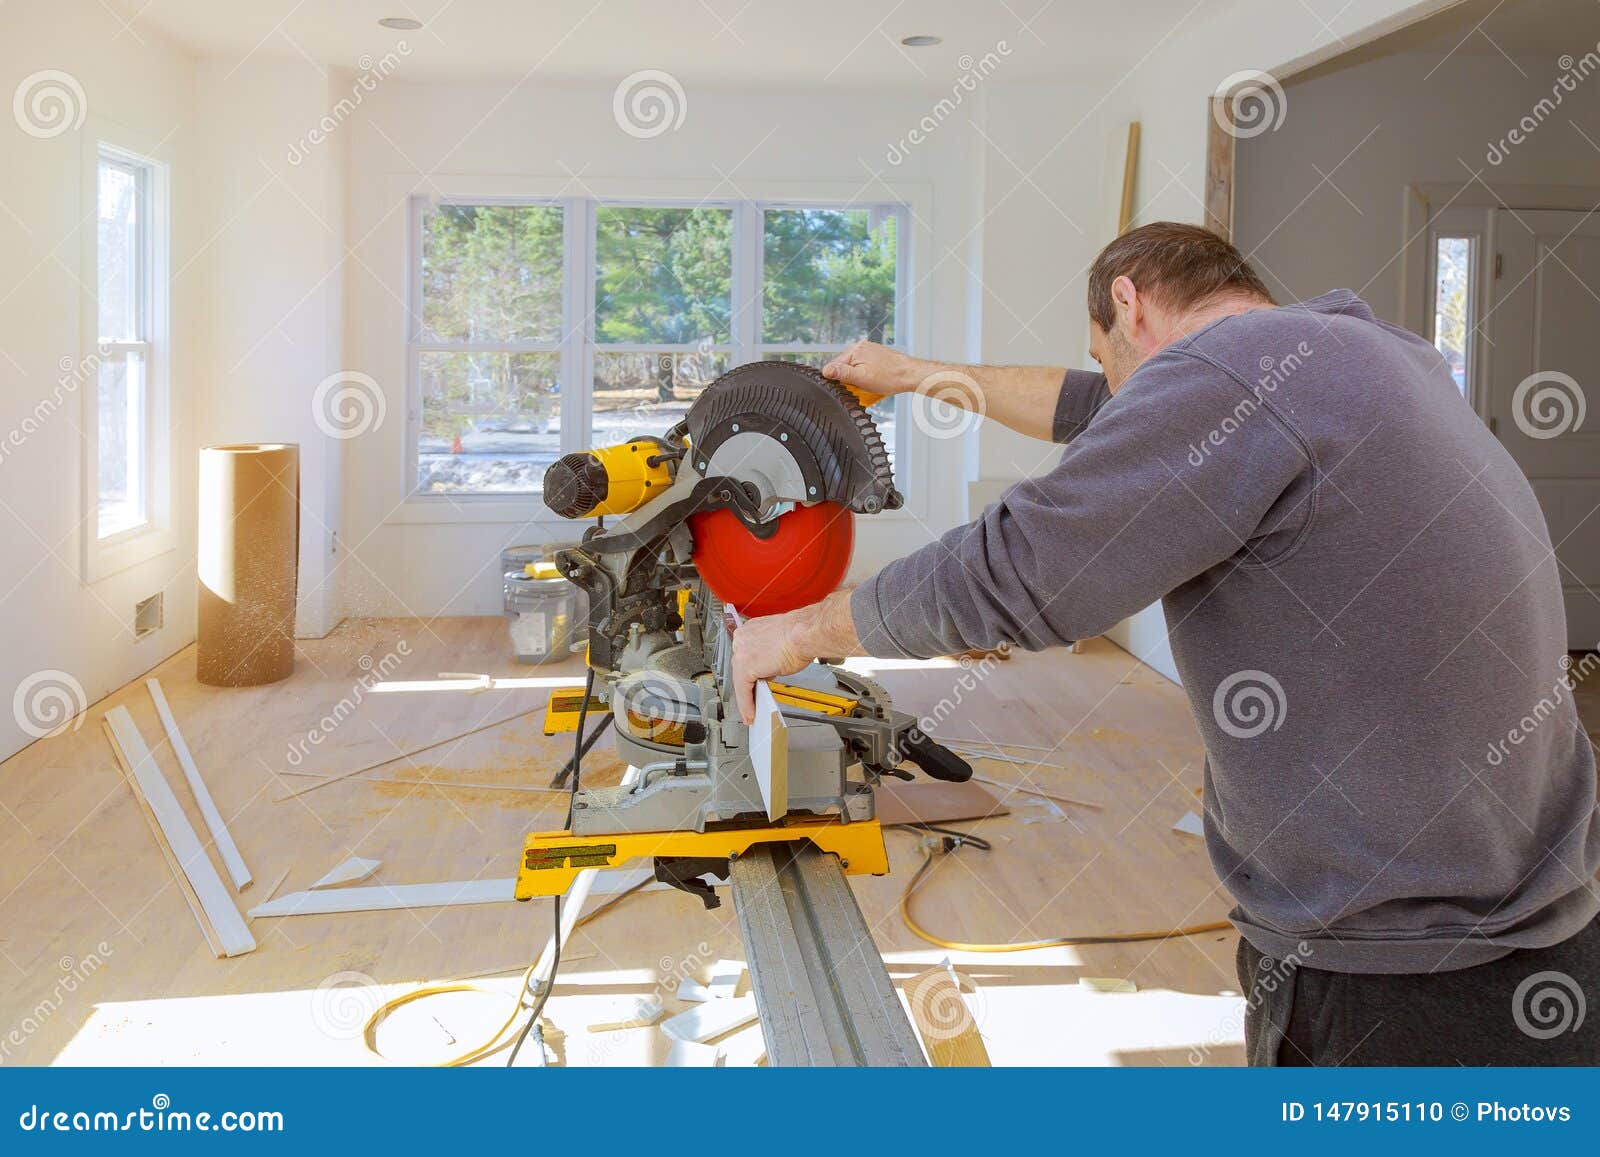 960 Trim Carpentry Photos Free Royalty Free Stock Photos From Dreamstime